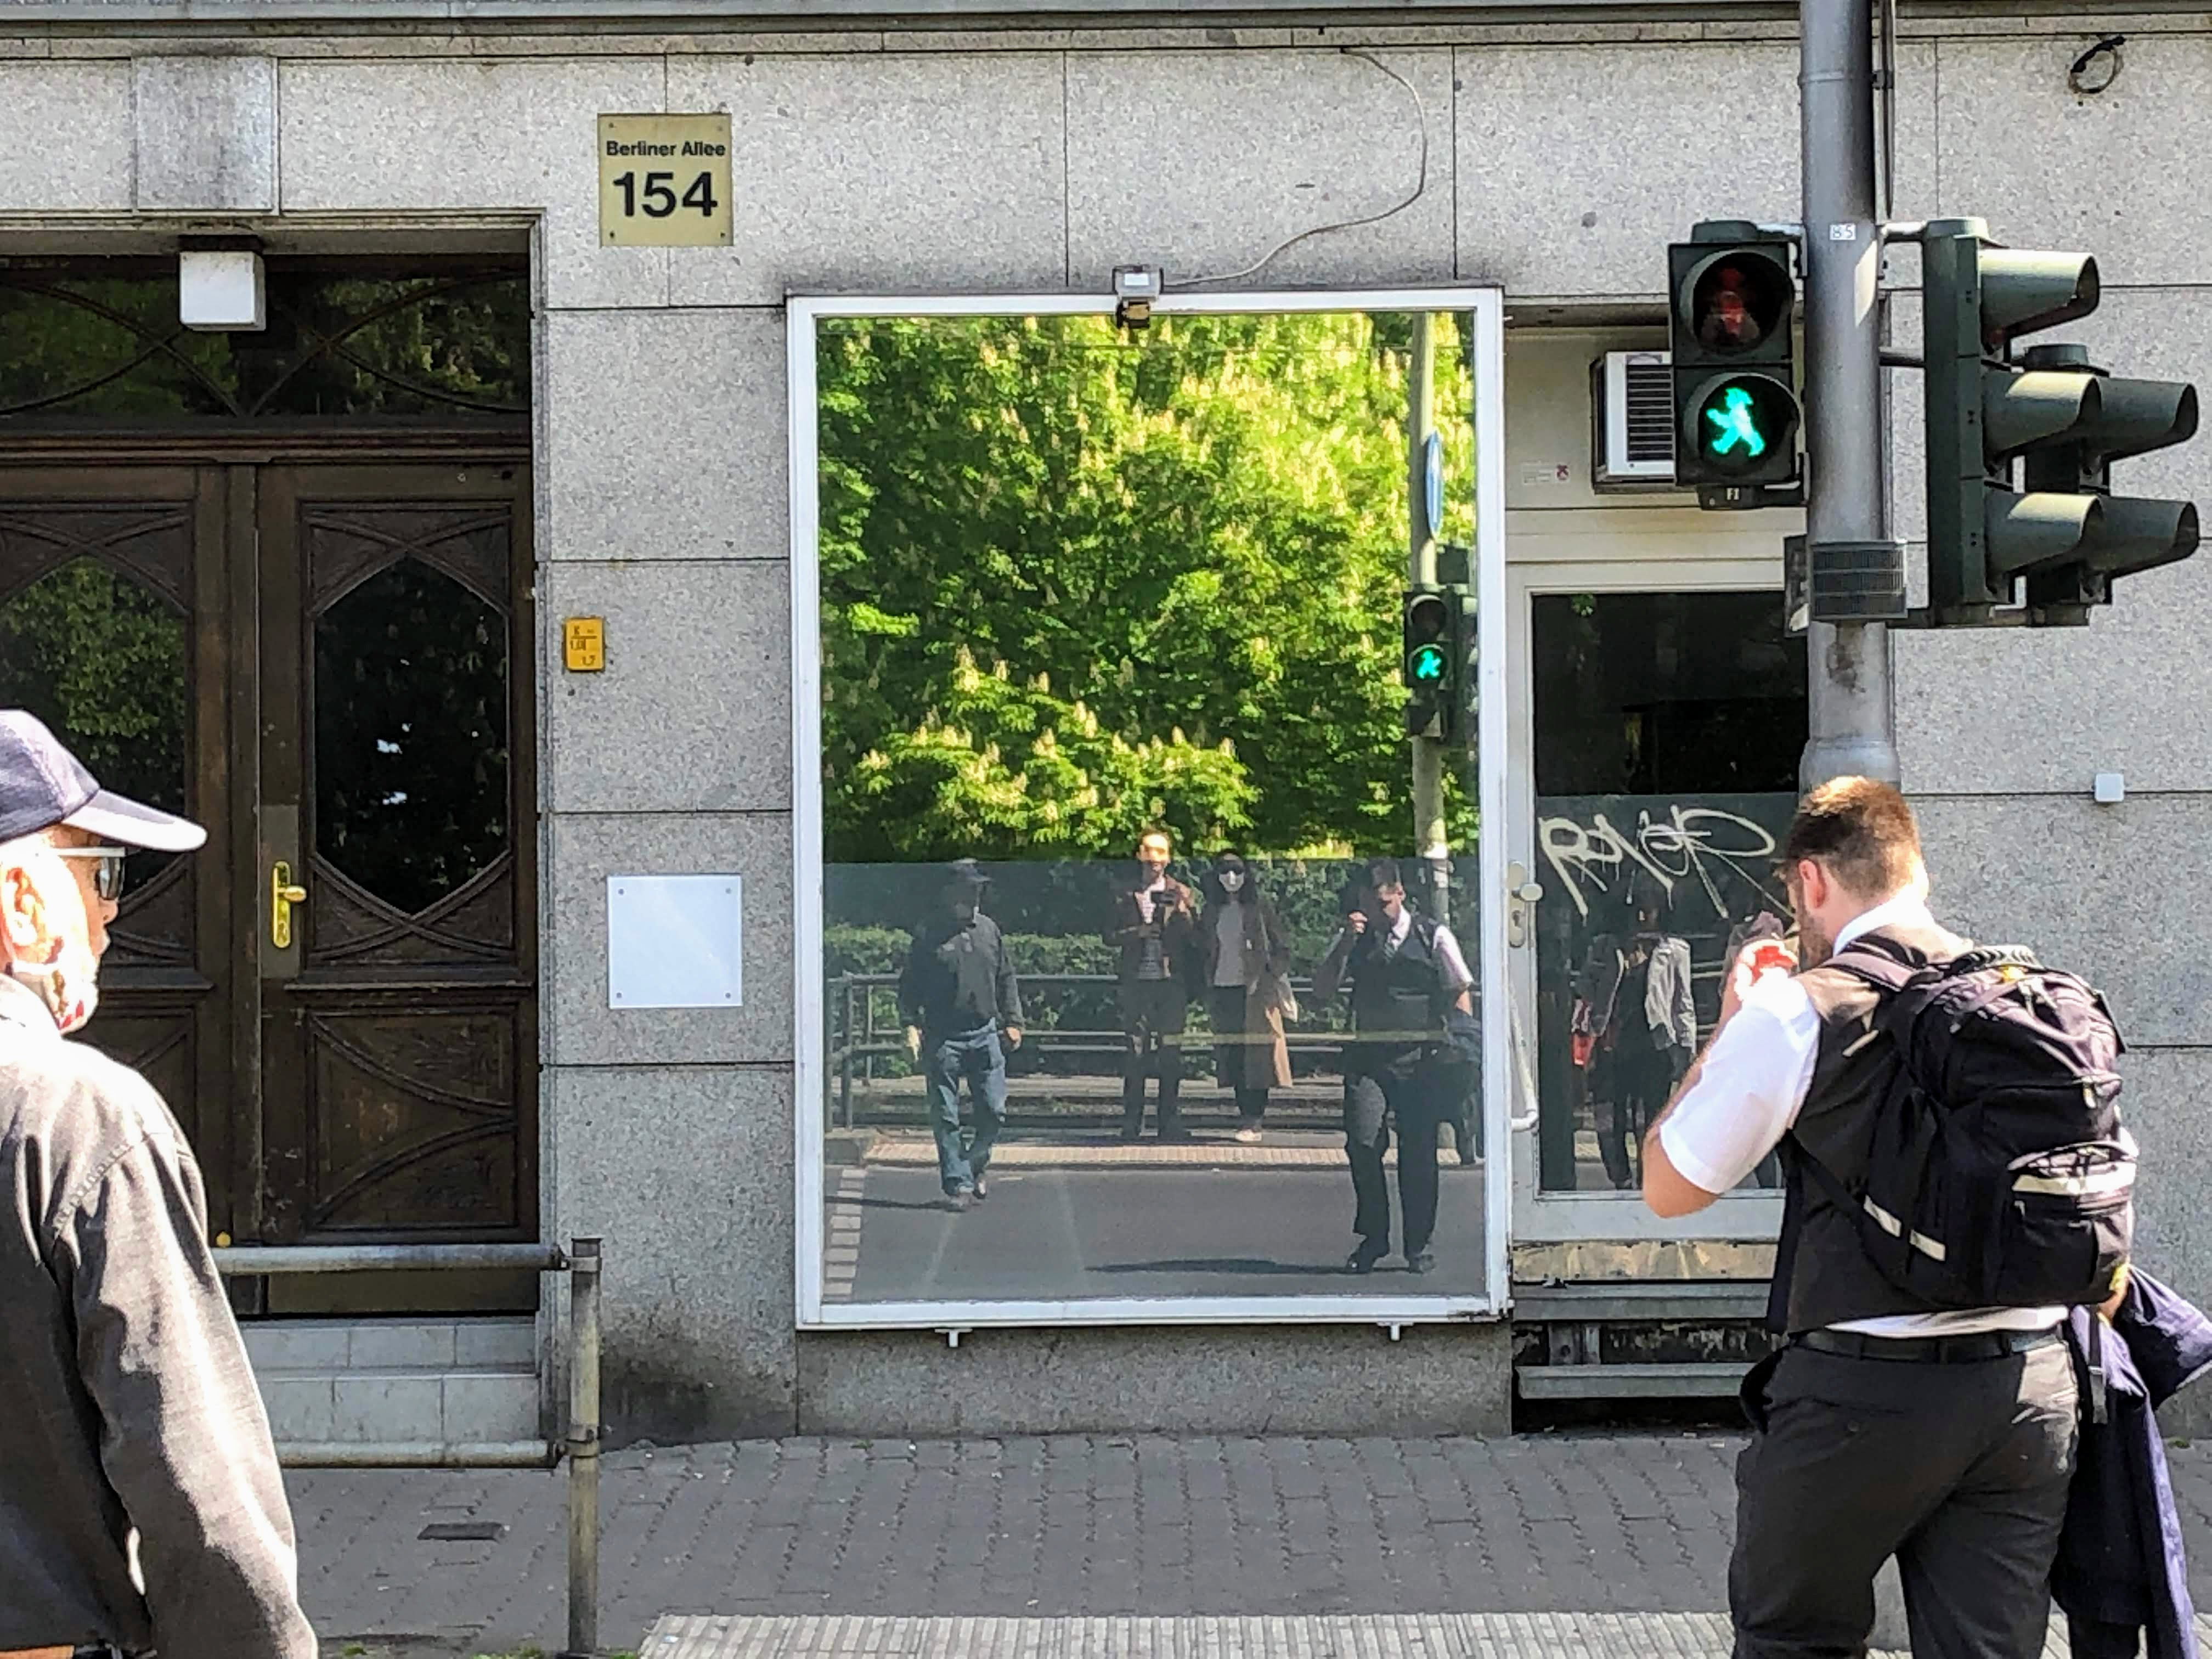 Picture of my reflection in a mirror on Berliner Allee